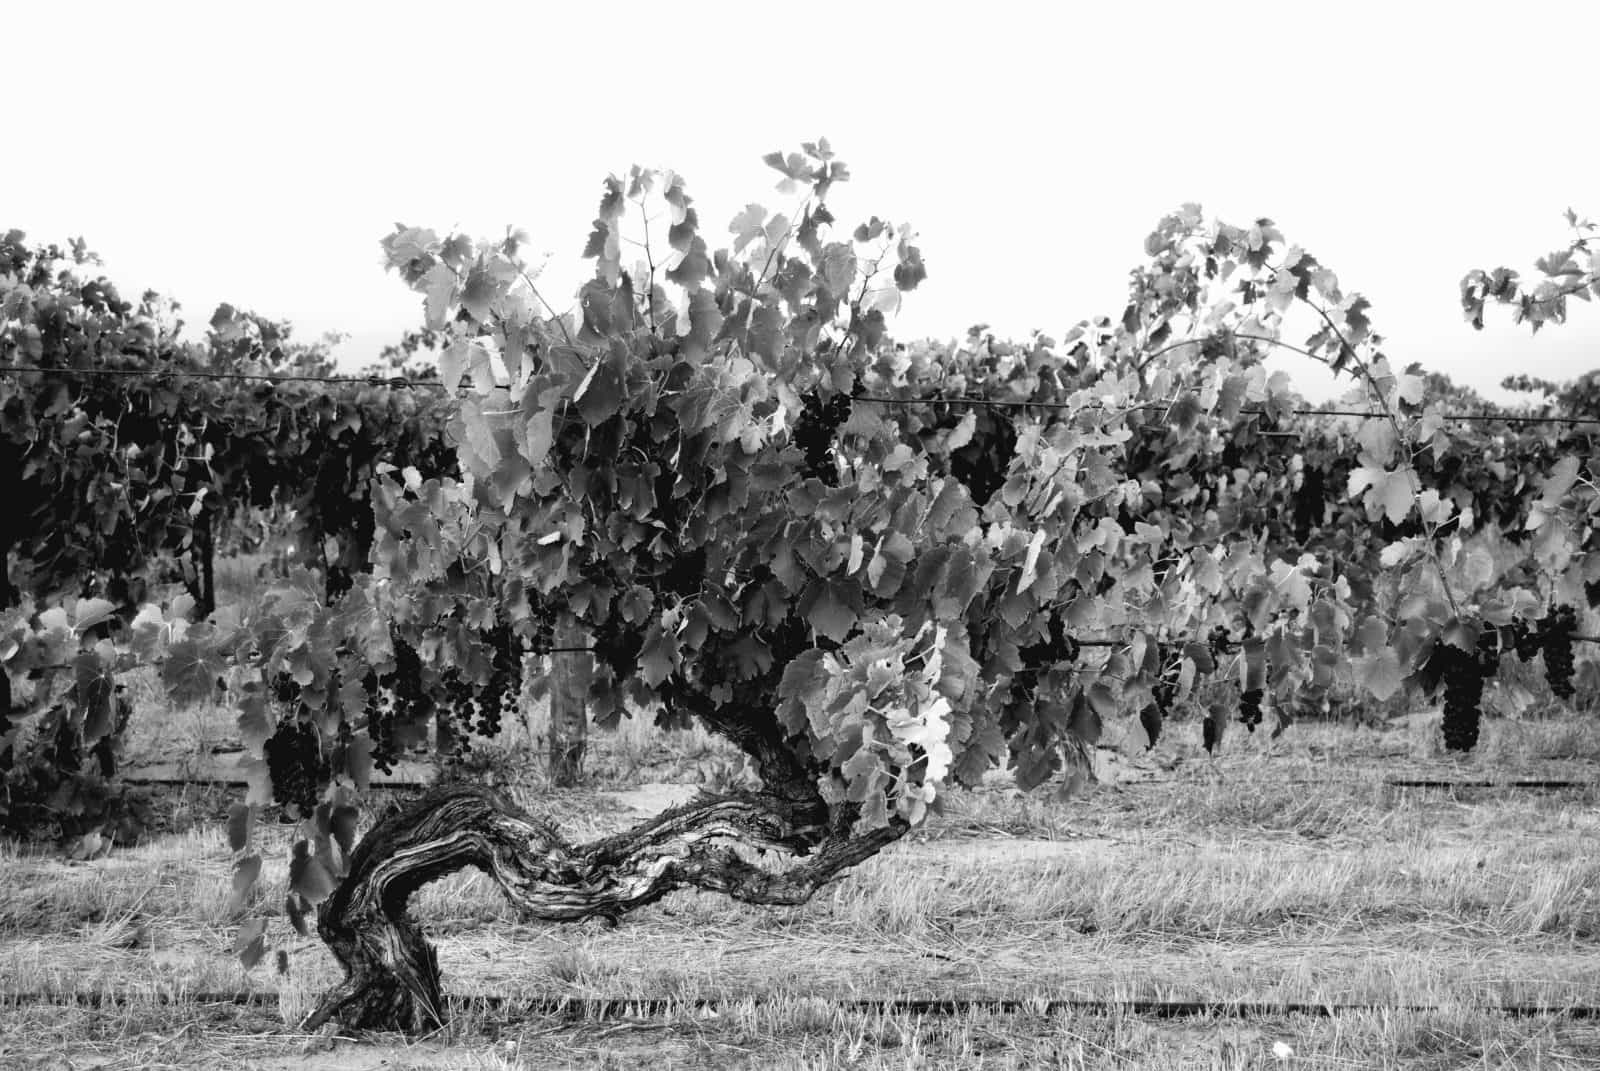 These vines have seen out 2 world wars and the great depression.